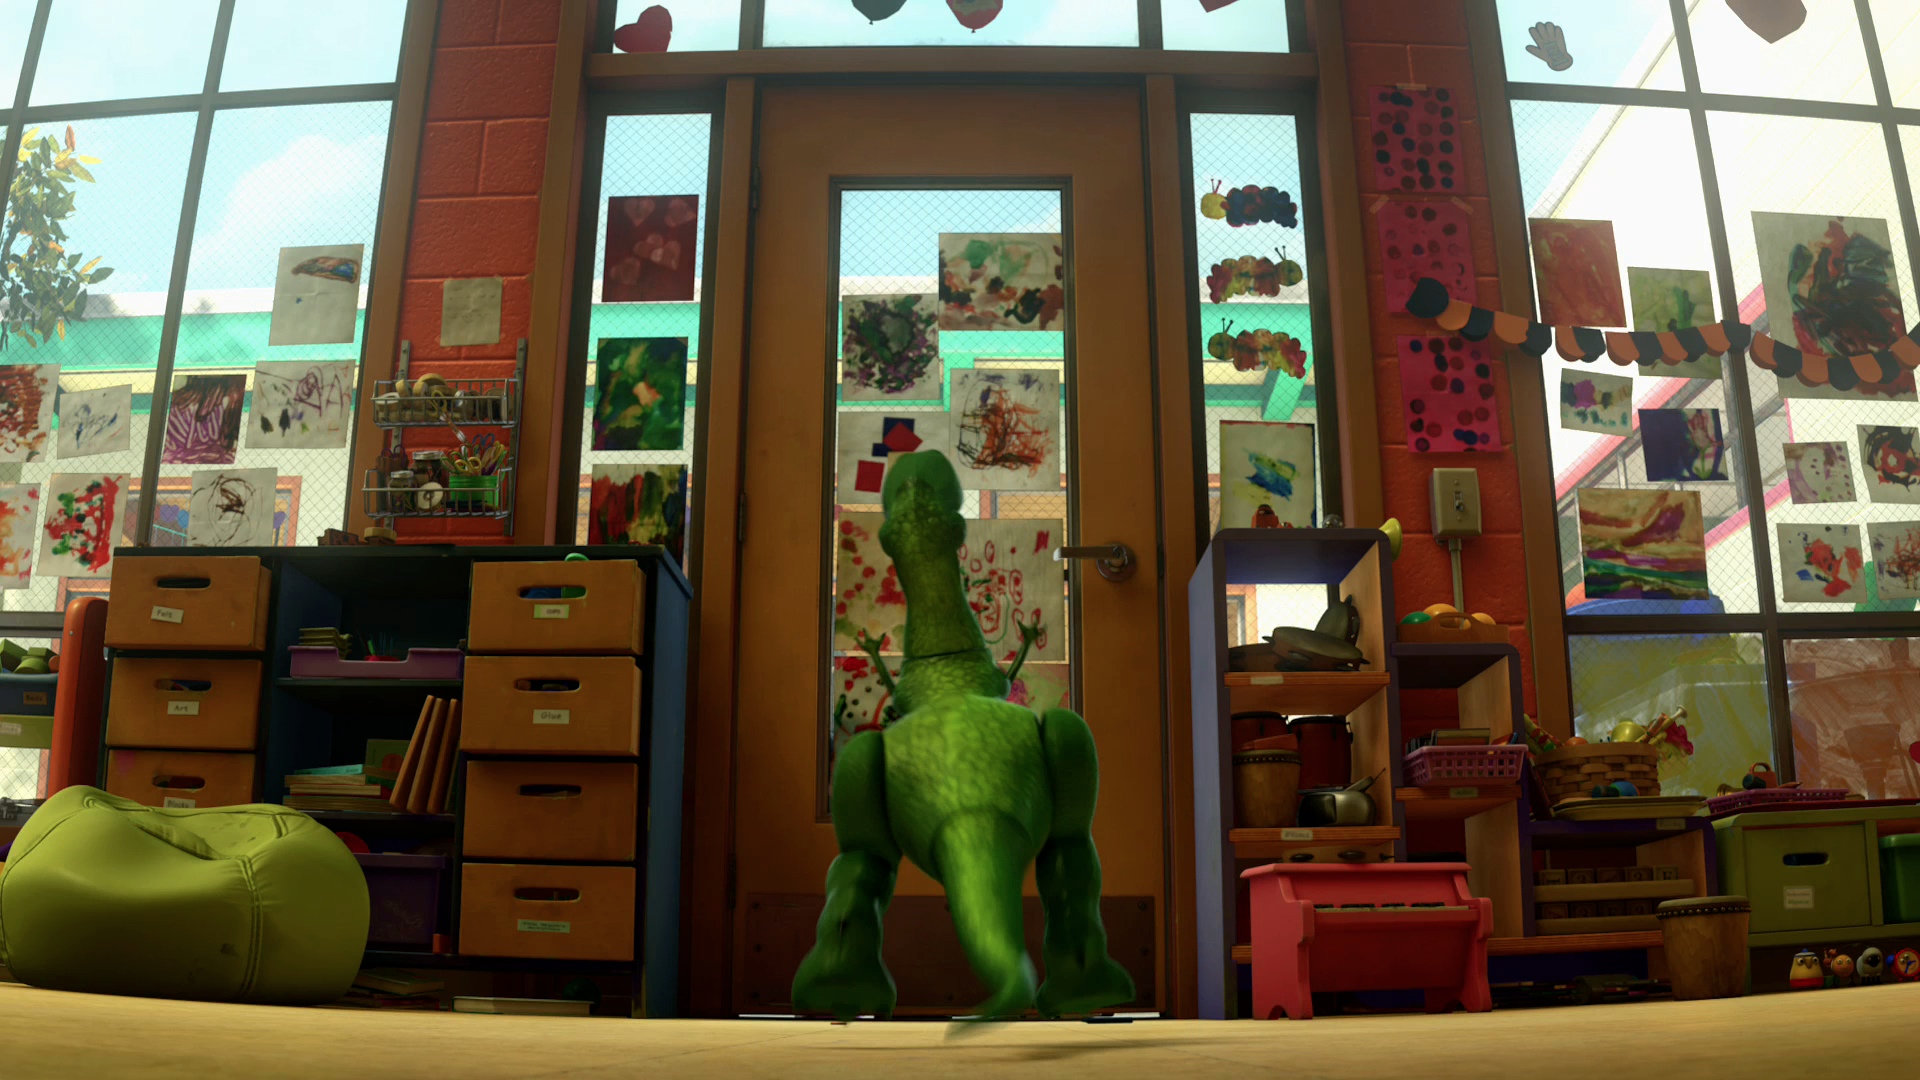 Movie Toy Story 3 HD Wallpaper | Background Image